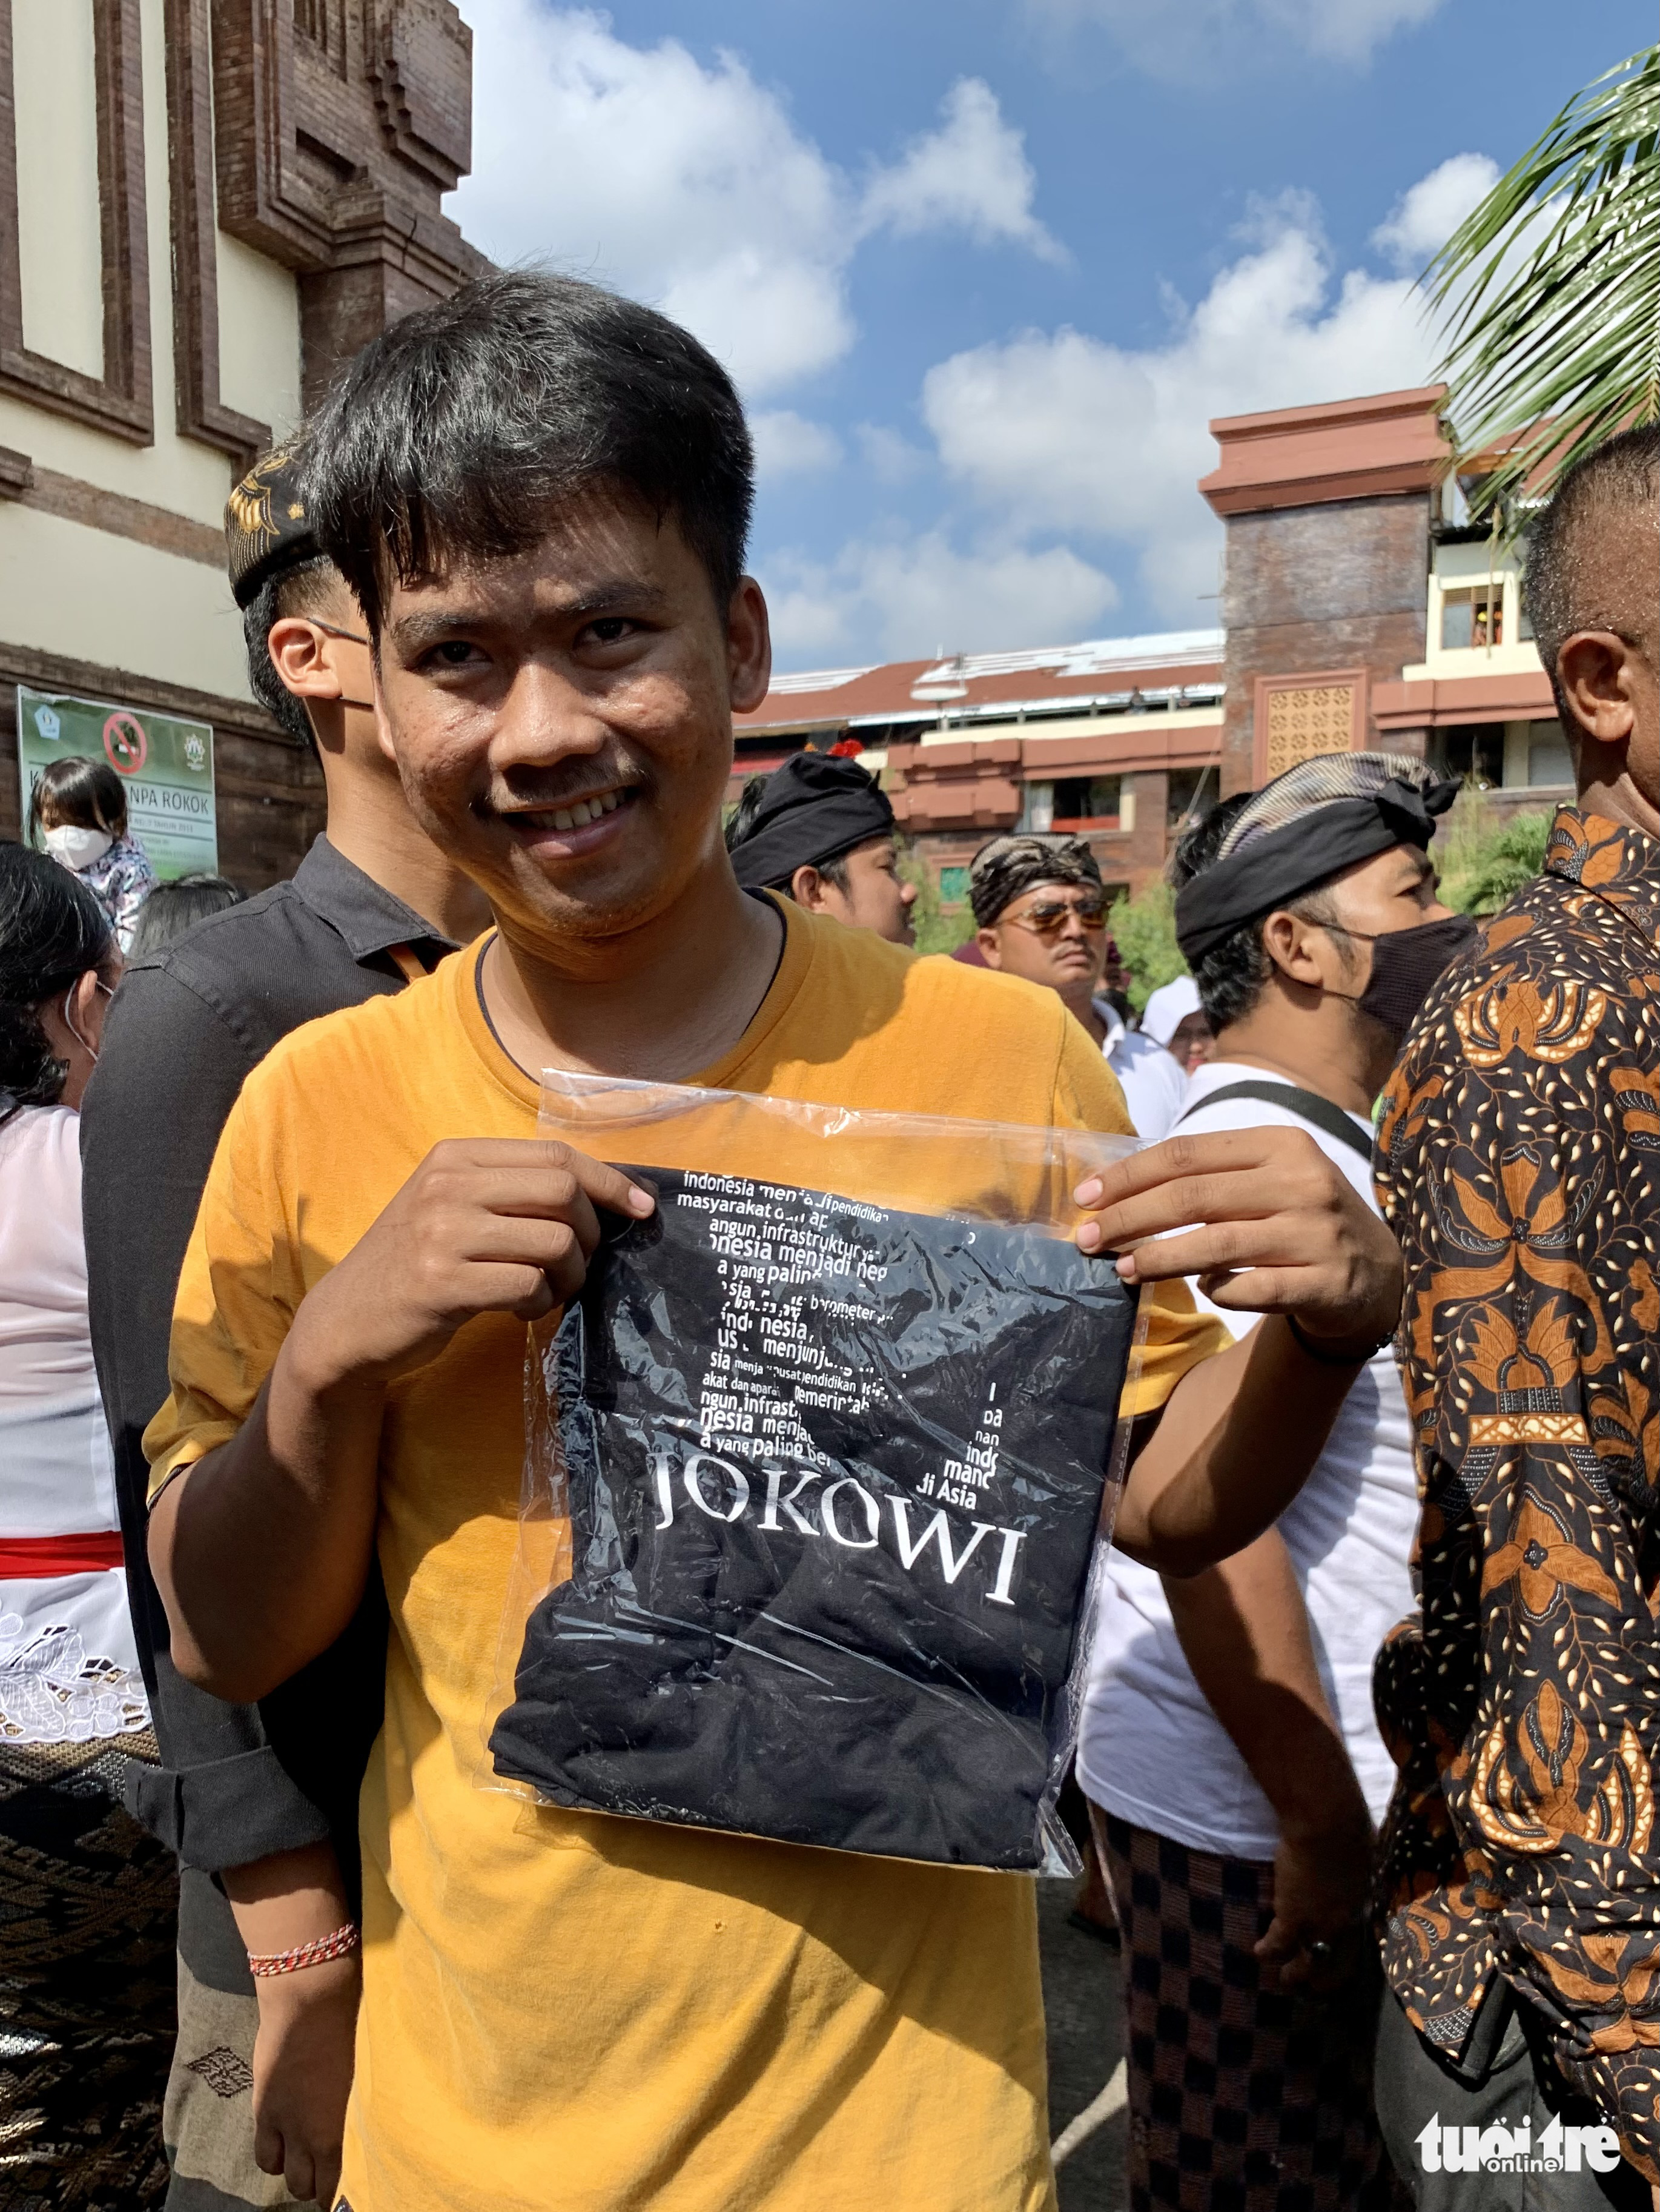 A resident receives a black T-shirt given out by Indonesian President Joko Widodo during the leader's inspection tour at Badung traditional market in Bali, Indonesia, November 17, 2022. Photo: Duy Linh / Tuoi Tre